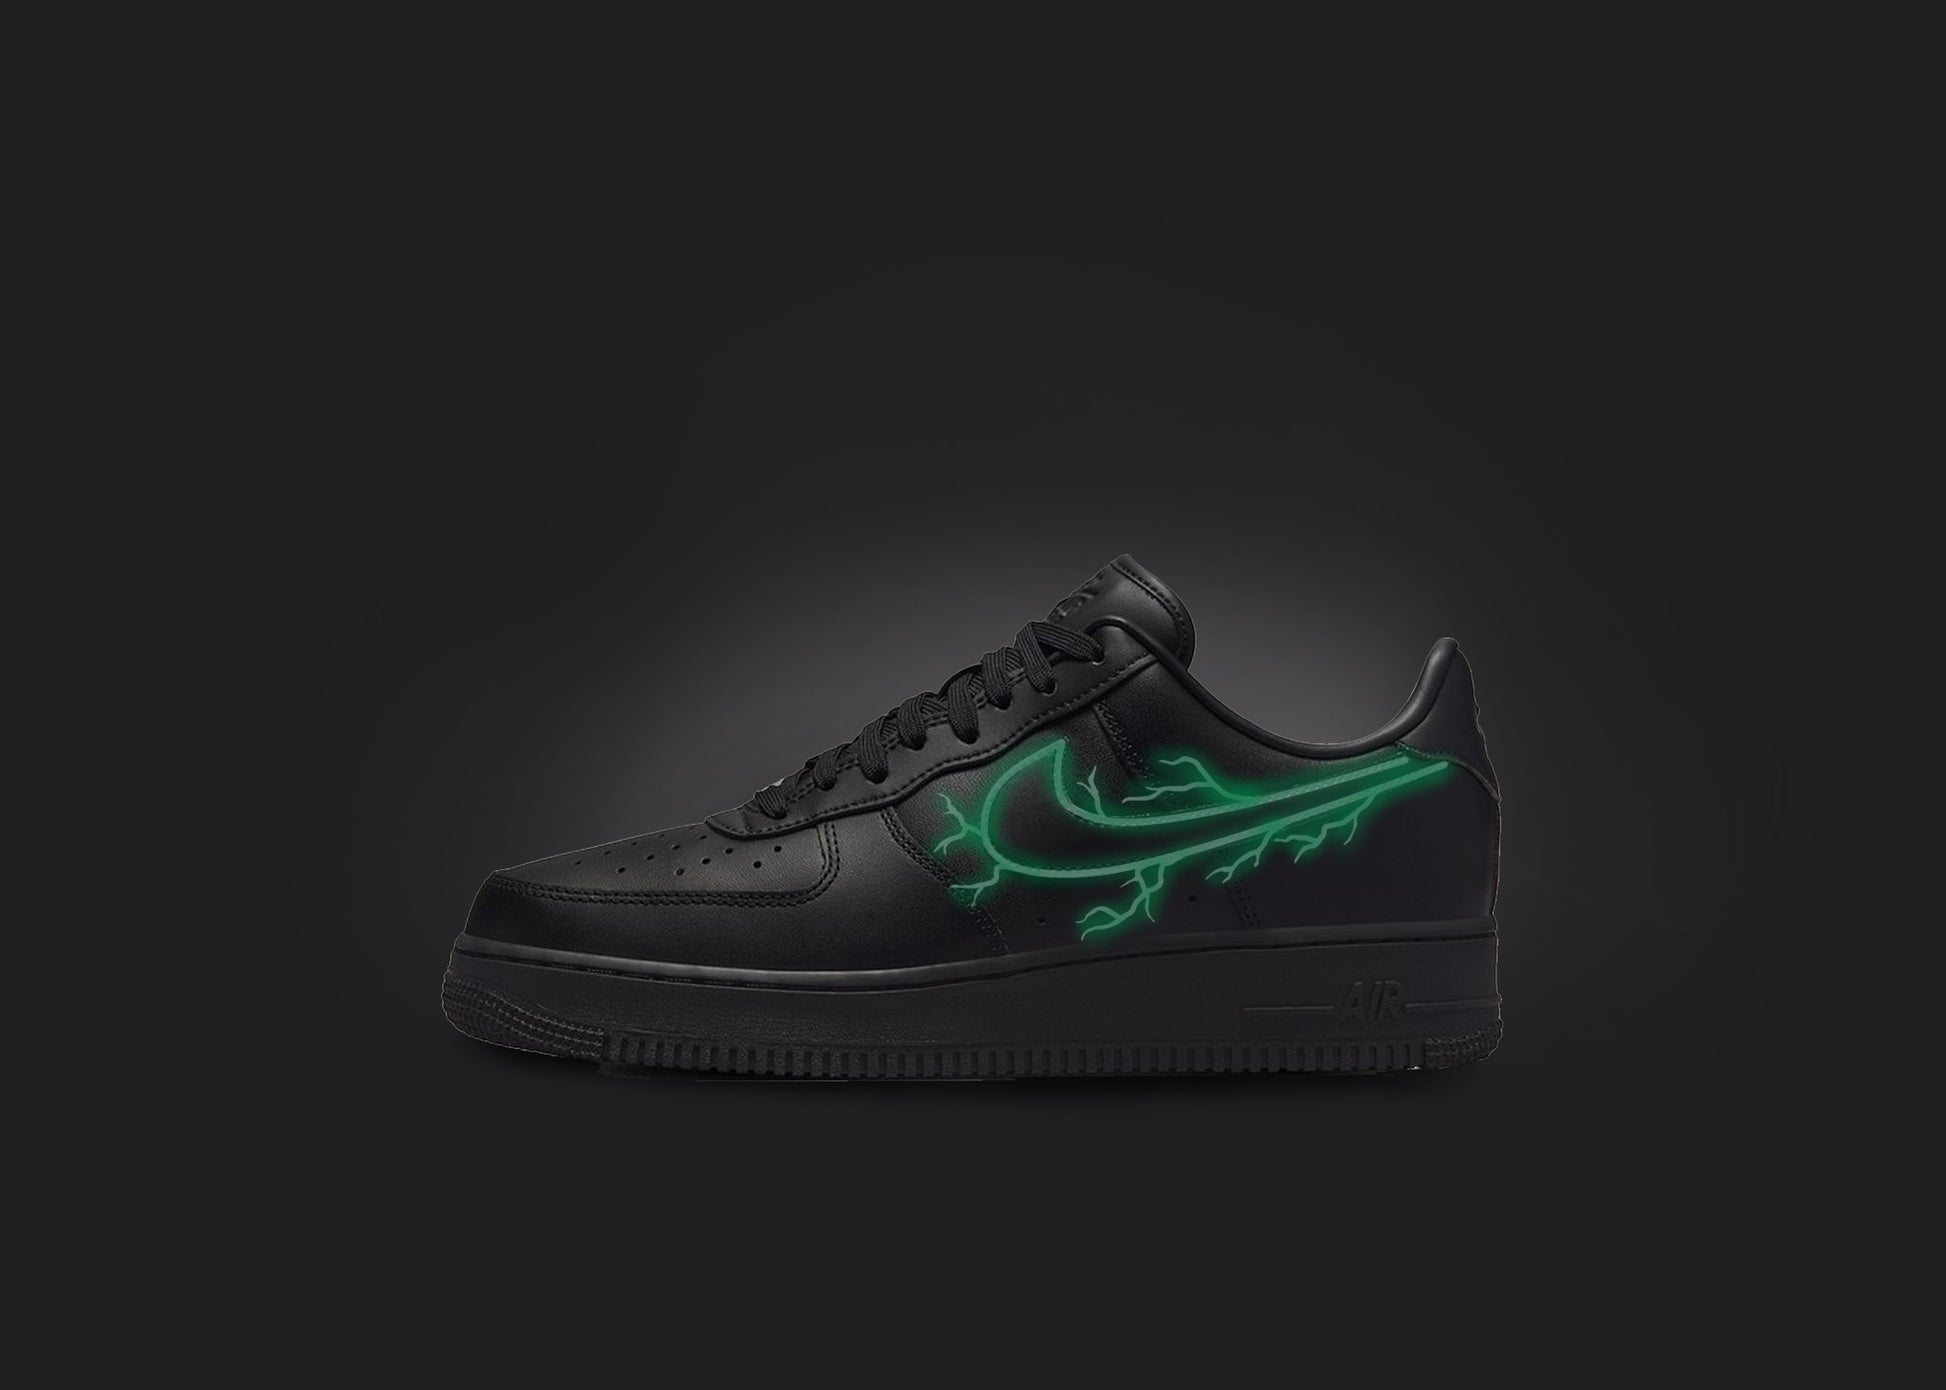 The image is featuring a custom black Air force 1 sneaker on a blank black background. The black nike sneaker has a green lightning design on the nike logo. 